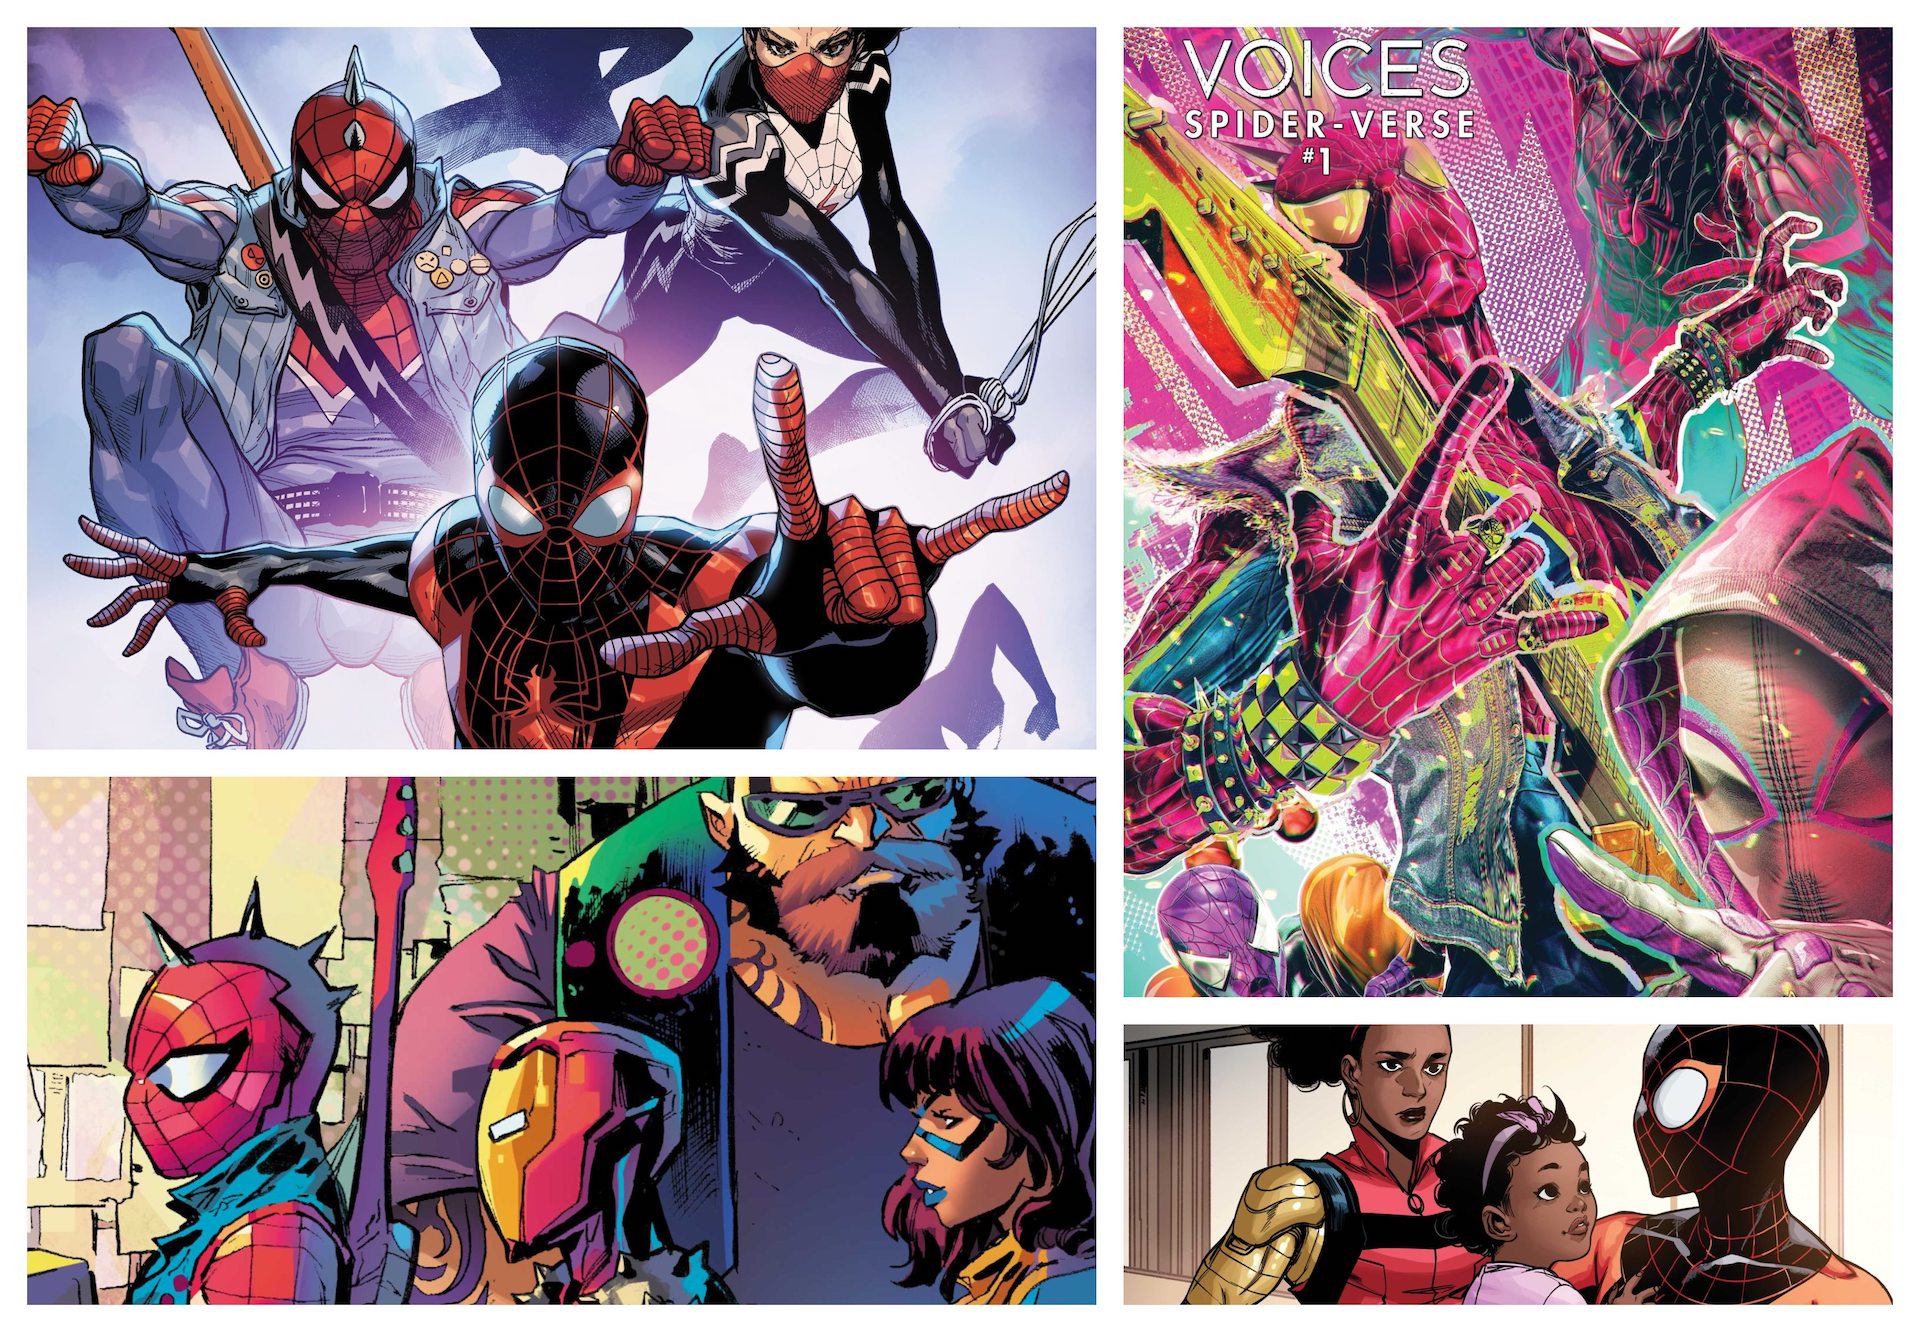 ‘Marvel’s Voices: Spider-Verse’ to introduce new spider-heroes in the Marvel Multiverse